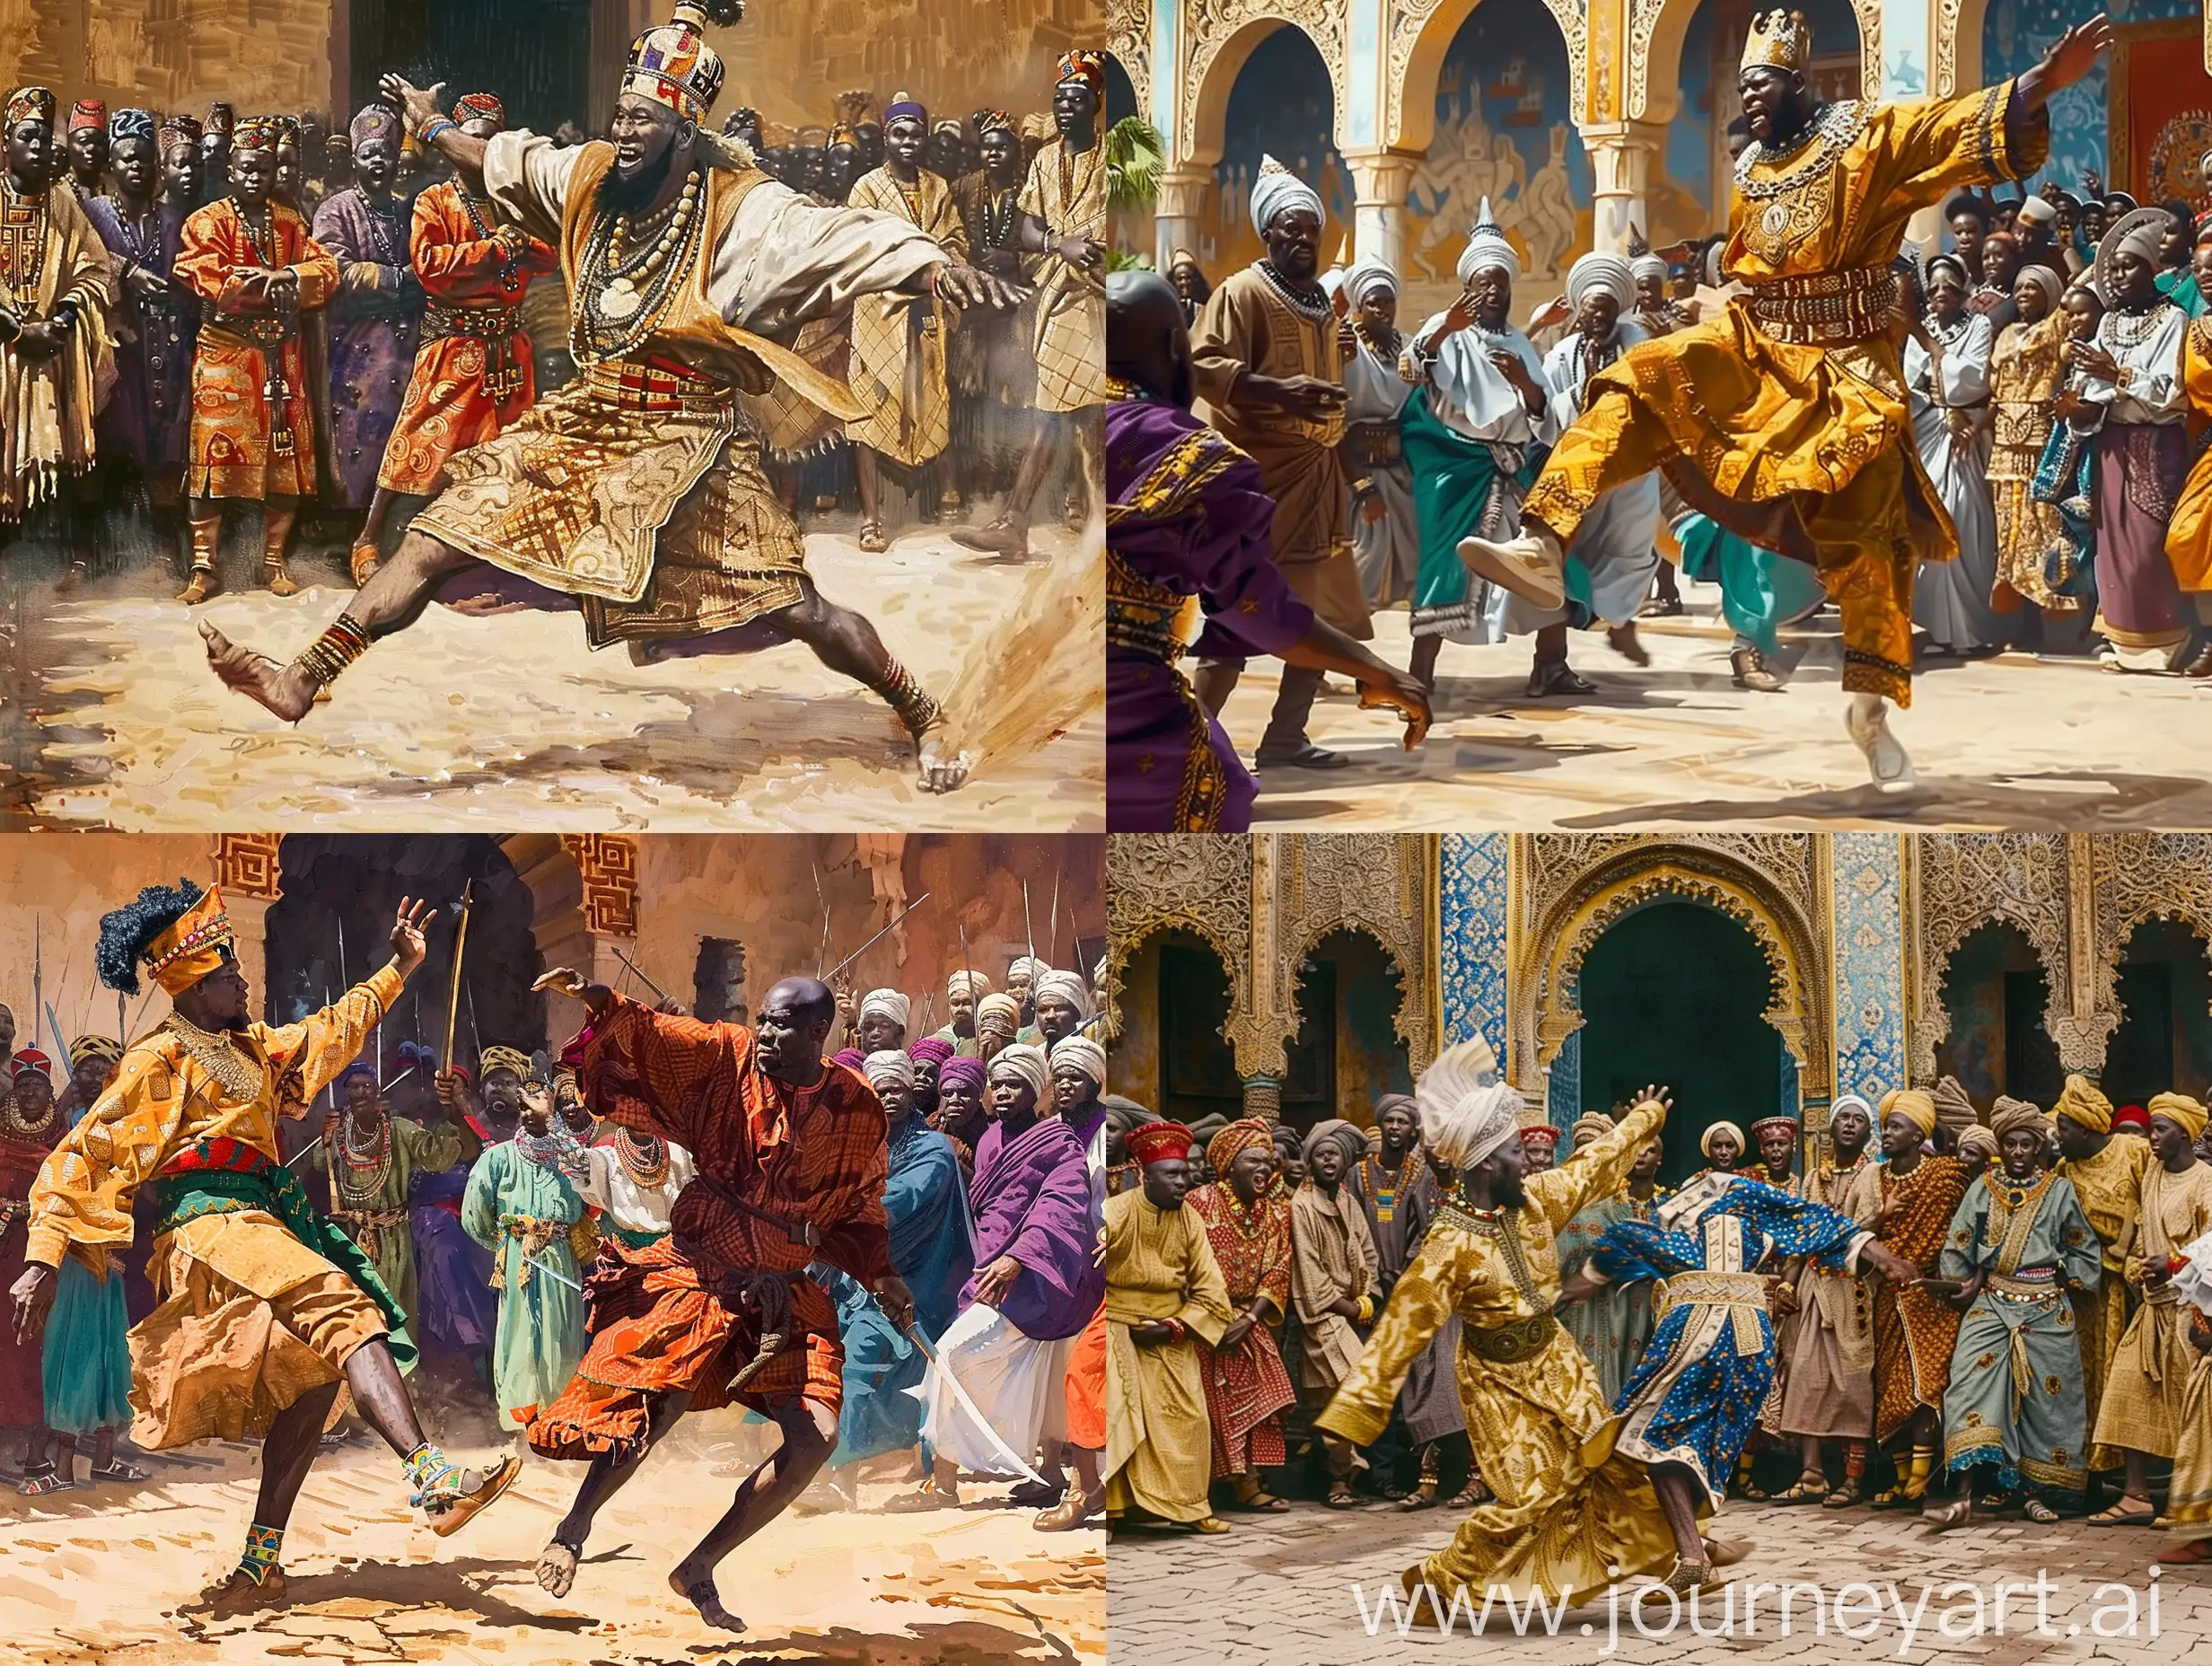 an African king kicking out his prince out of the palace with 100 subjects watching in surprise 